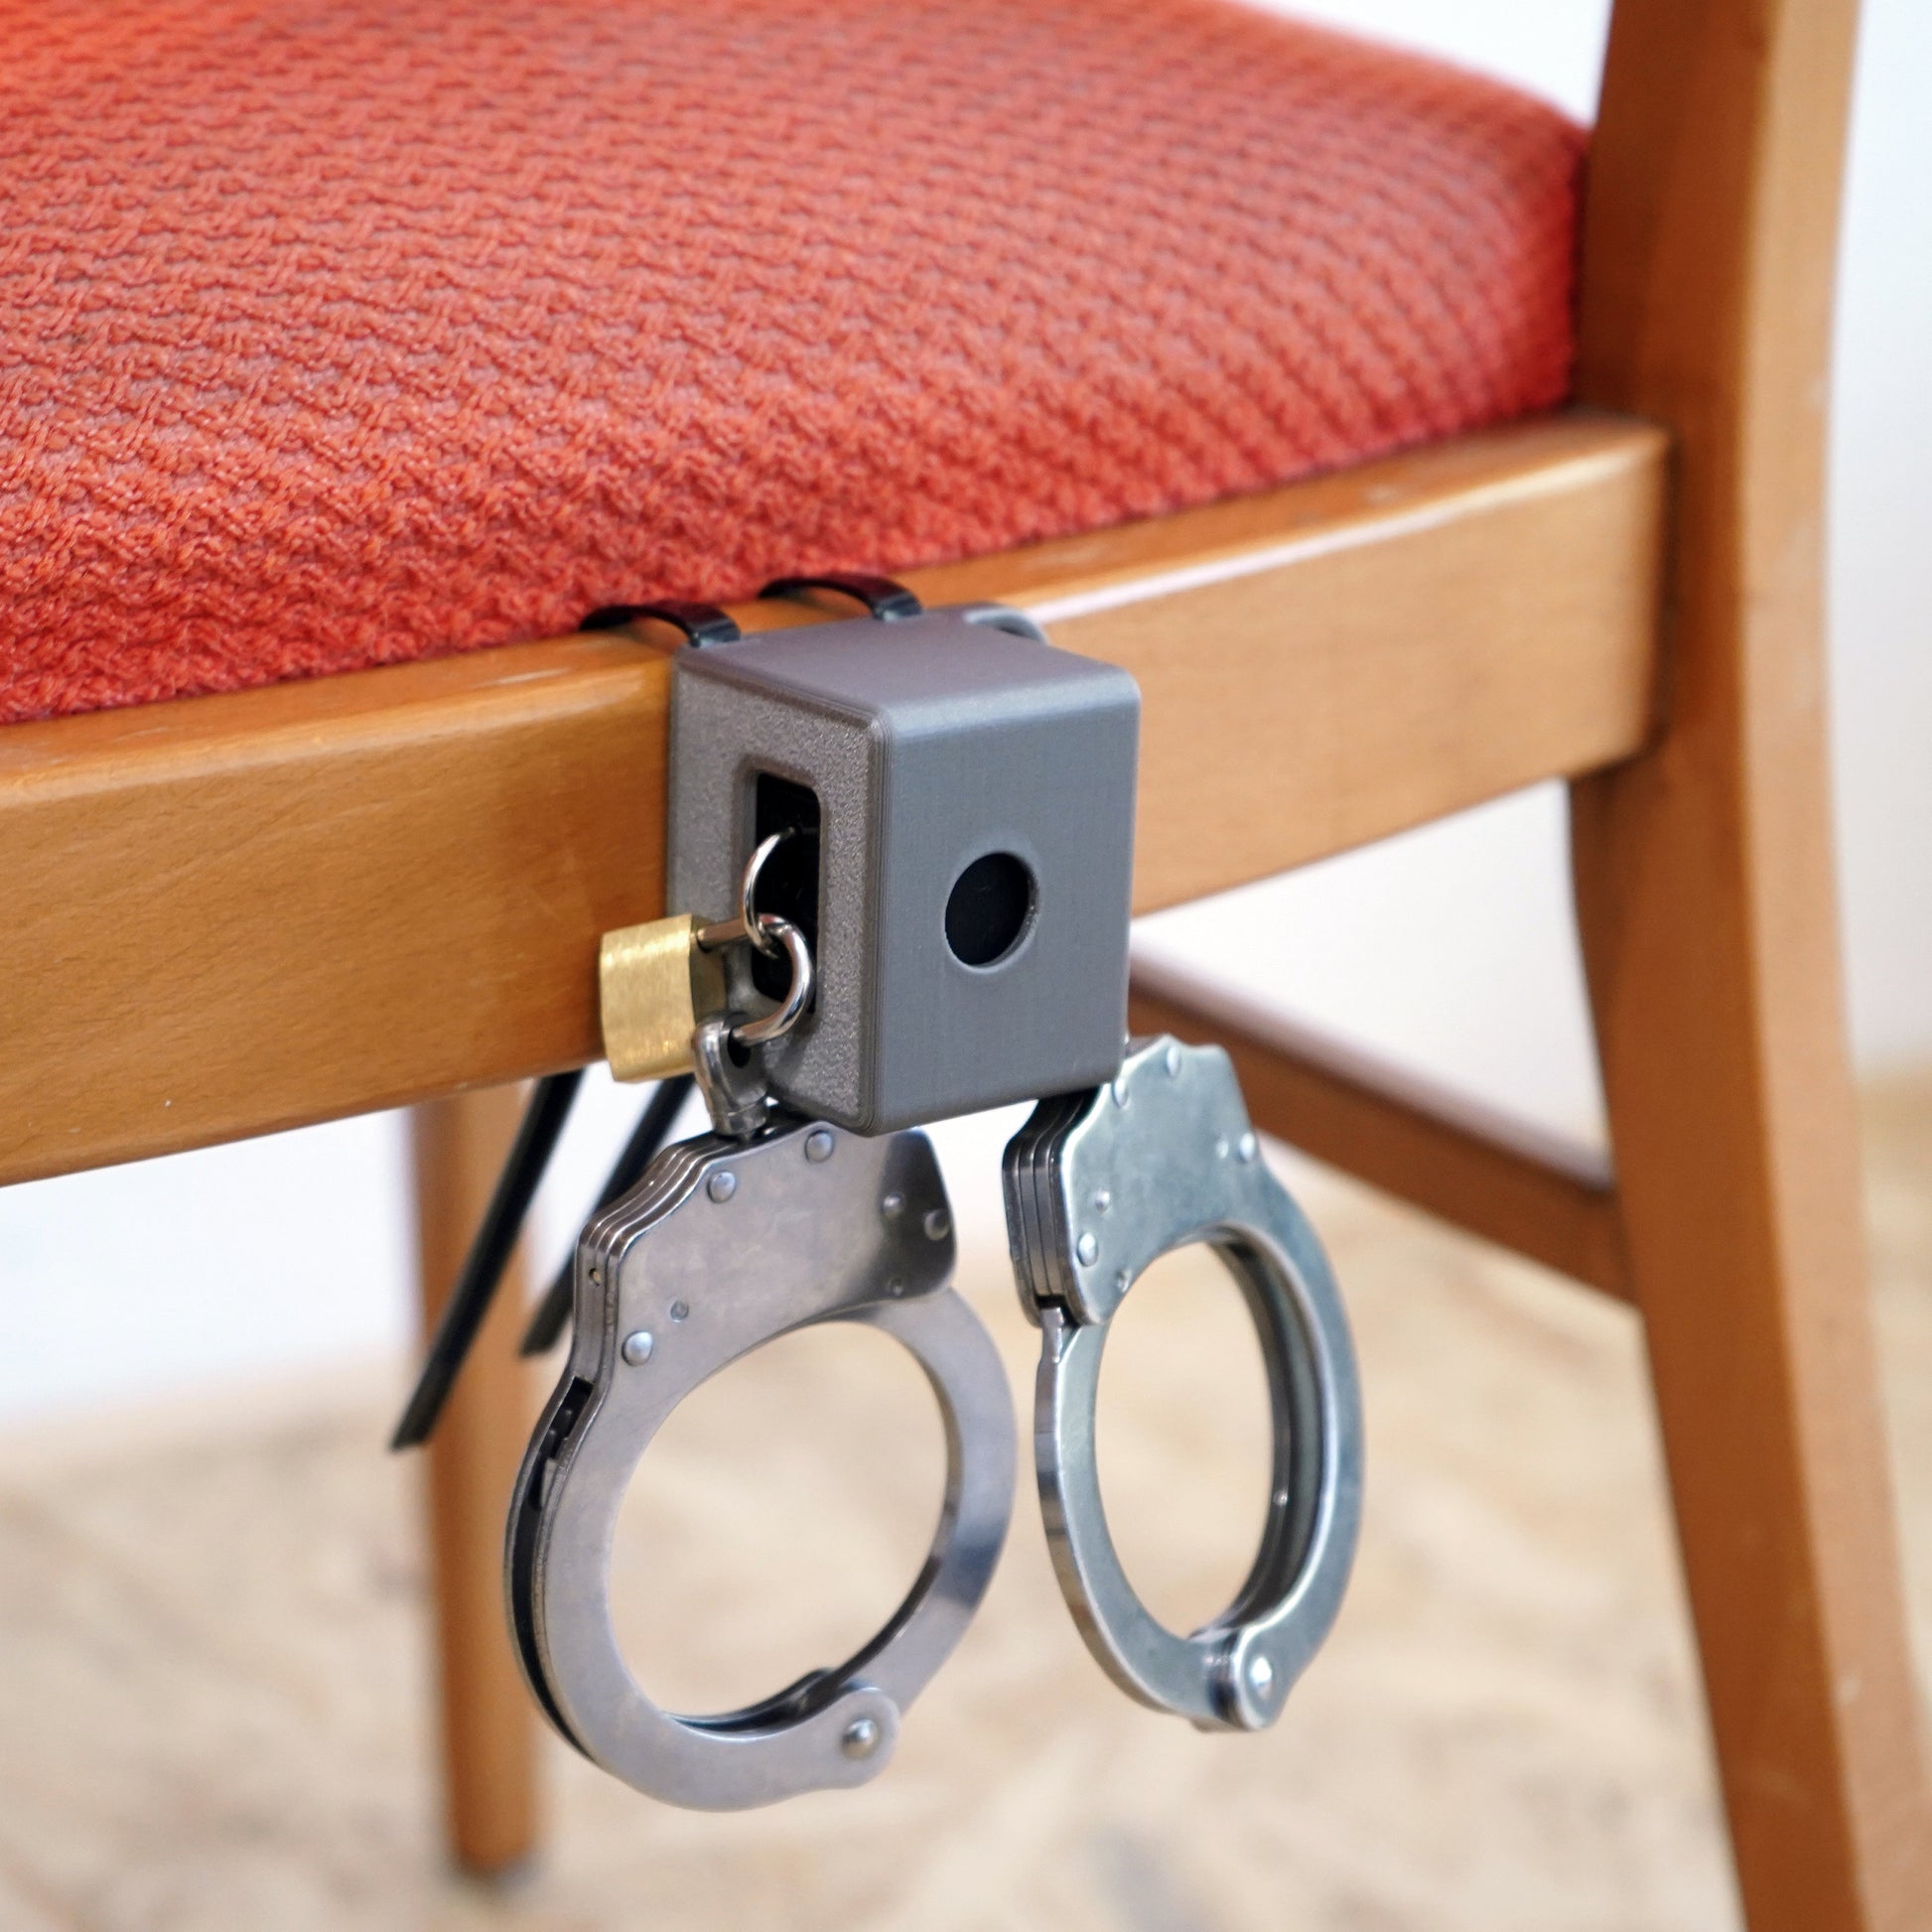 New design: selfbondage chair mount with time lock - one hour locking time